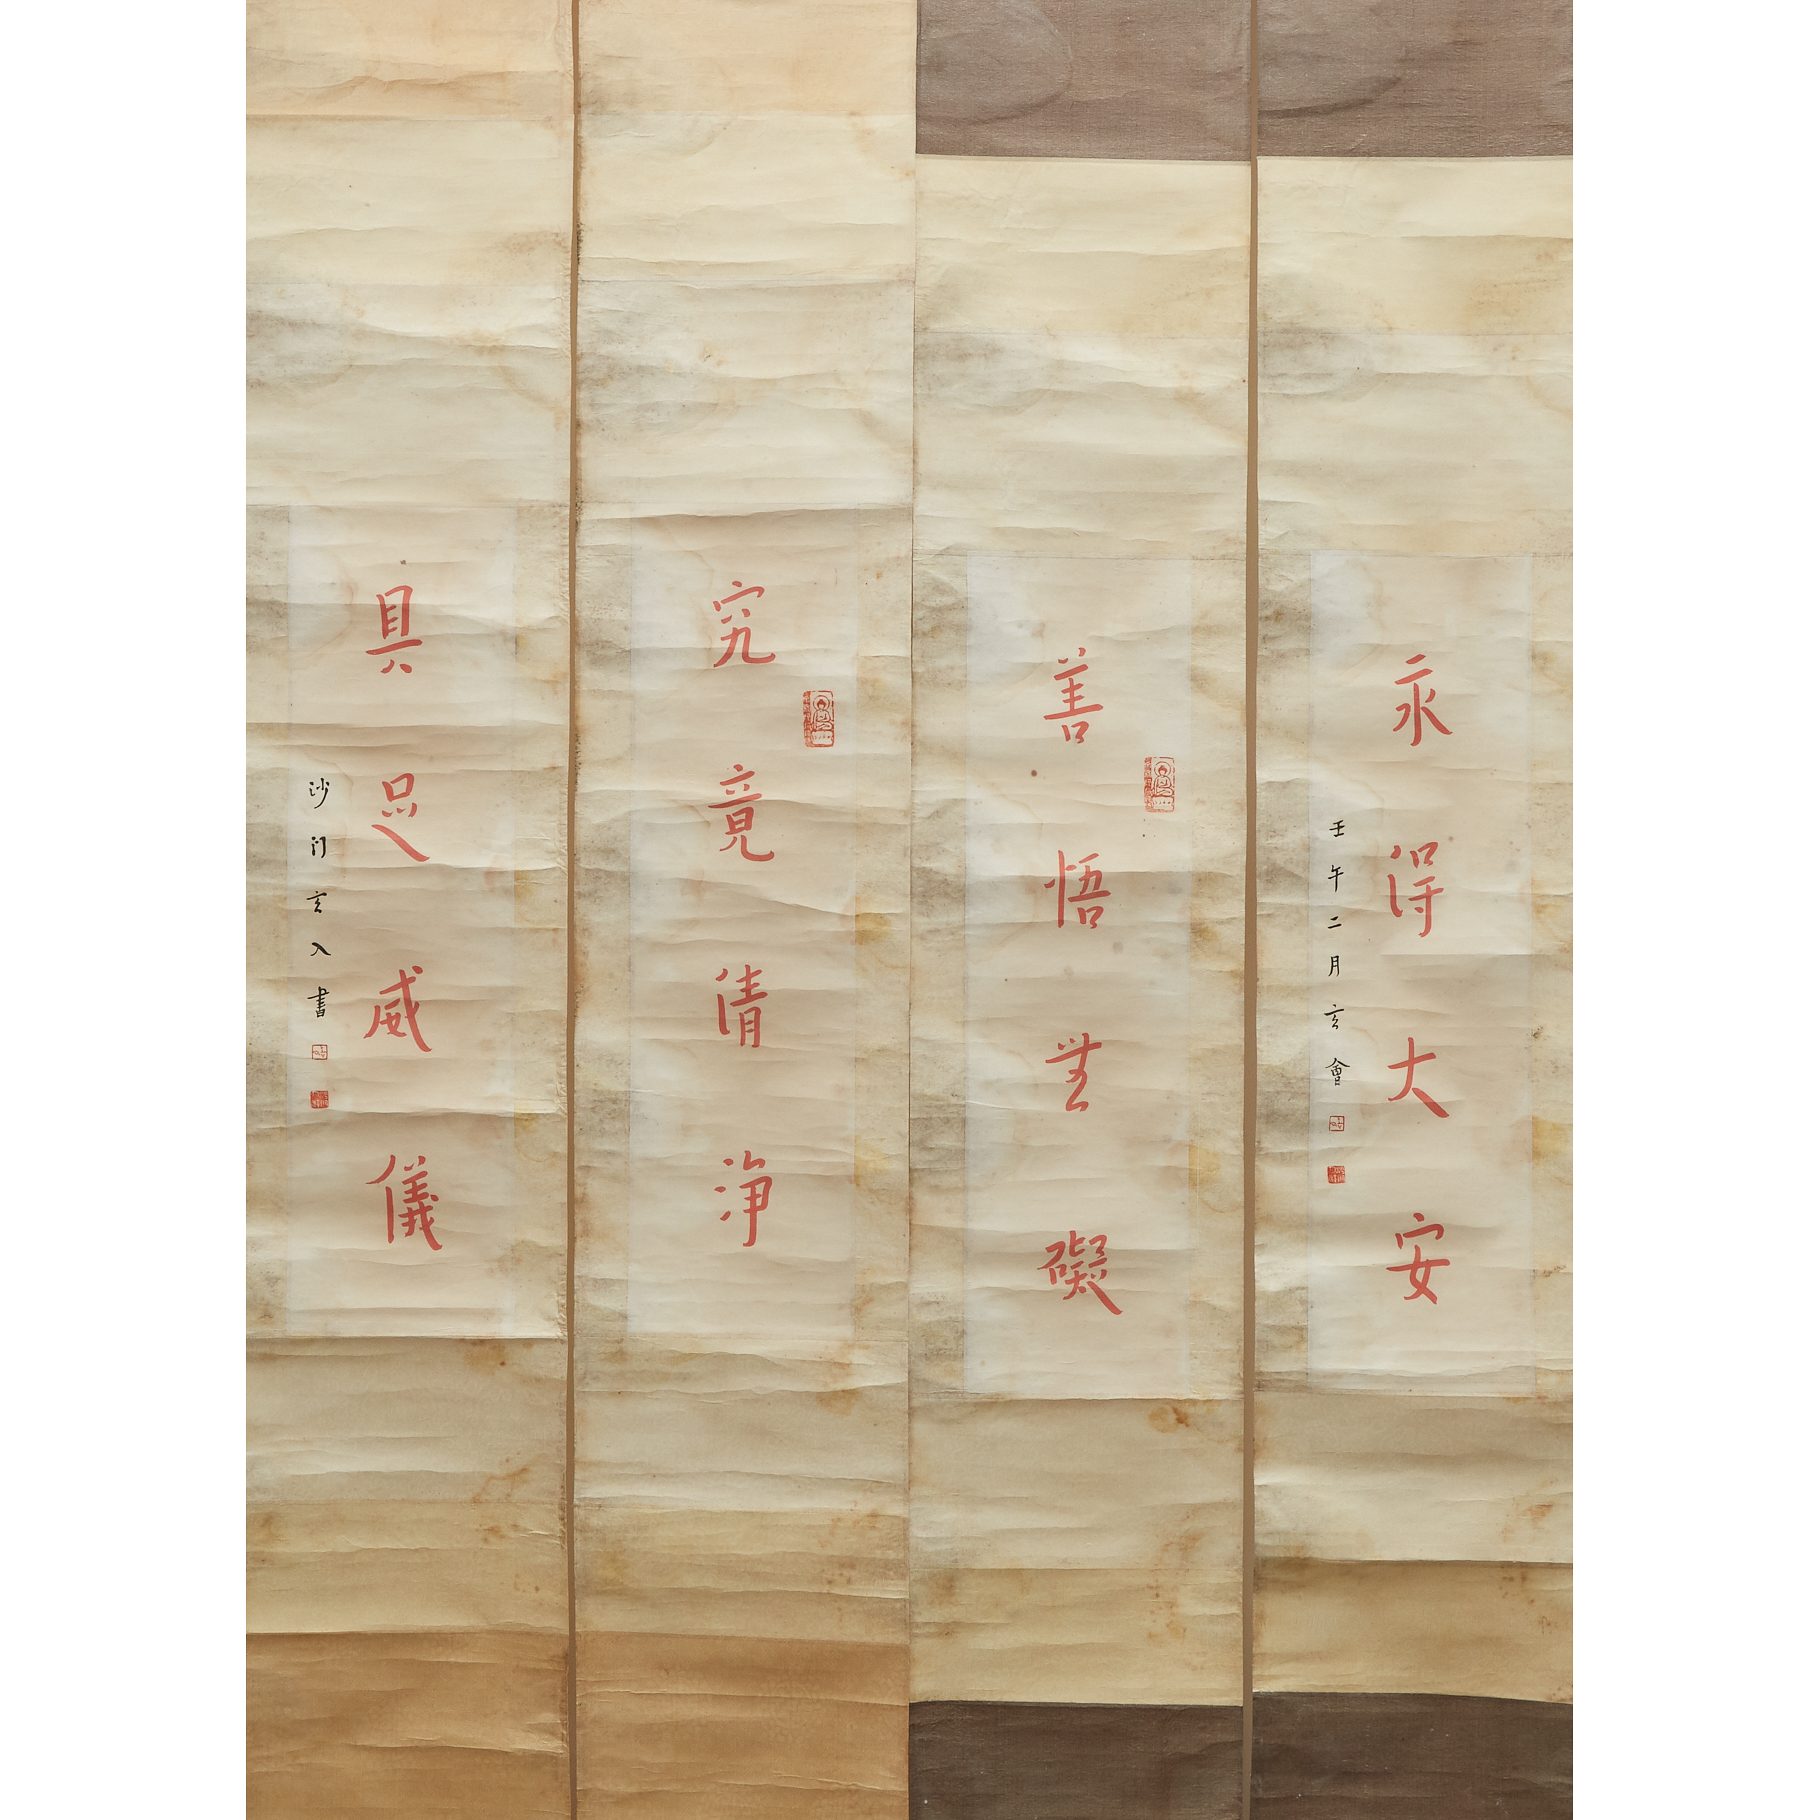 After Hong Yi (1880-1942), A Set of Four Calligraphy Scrolls